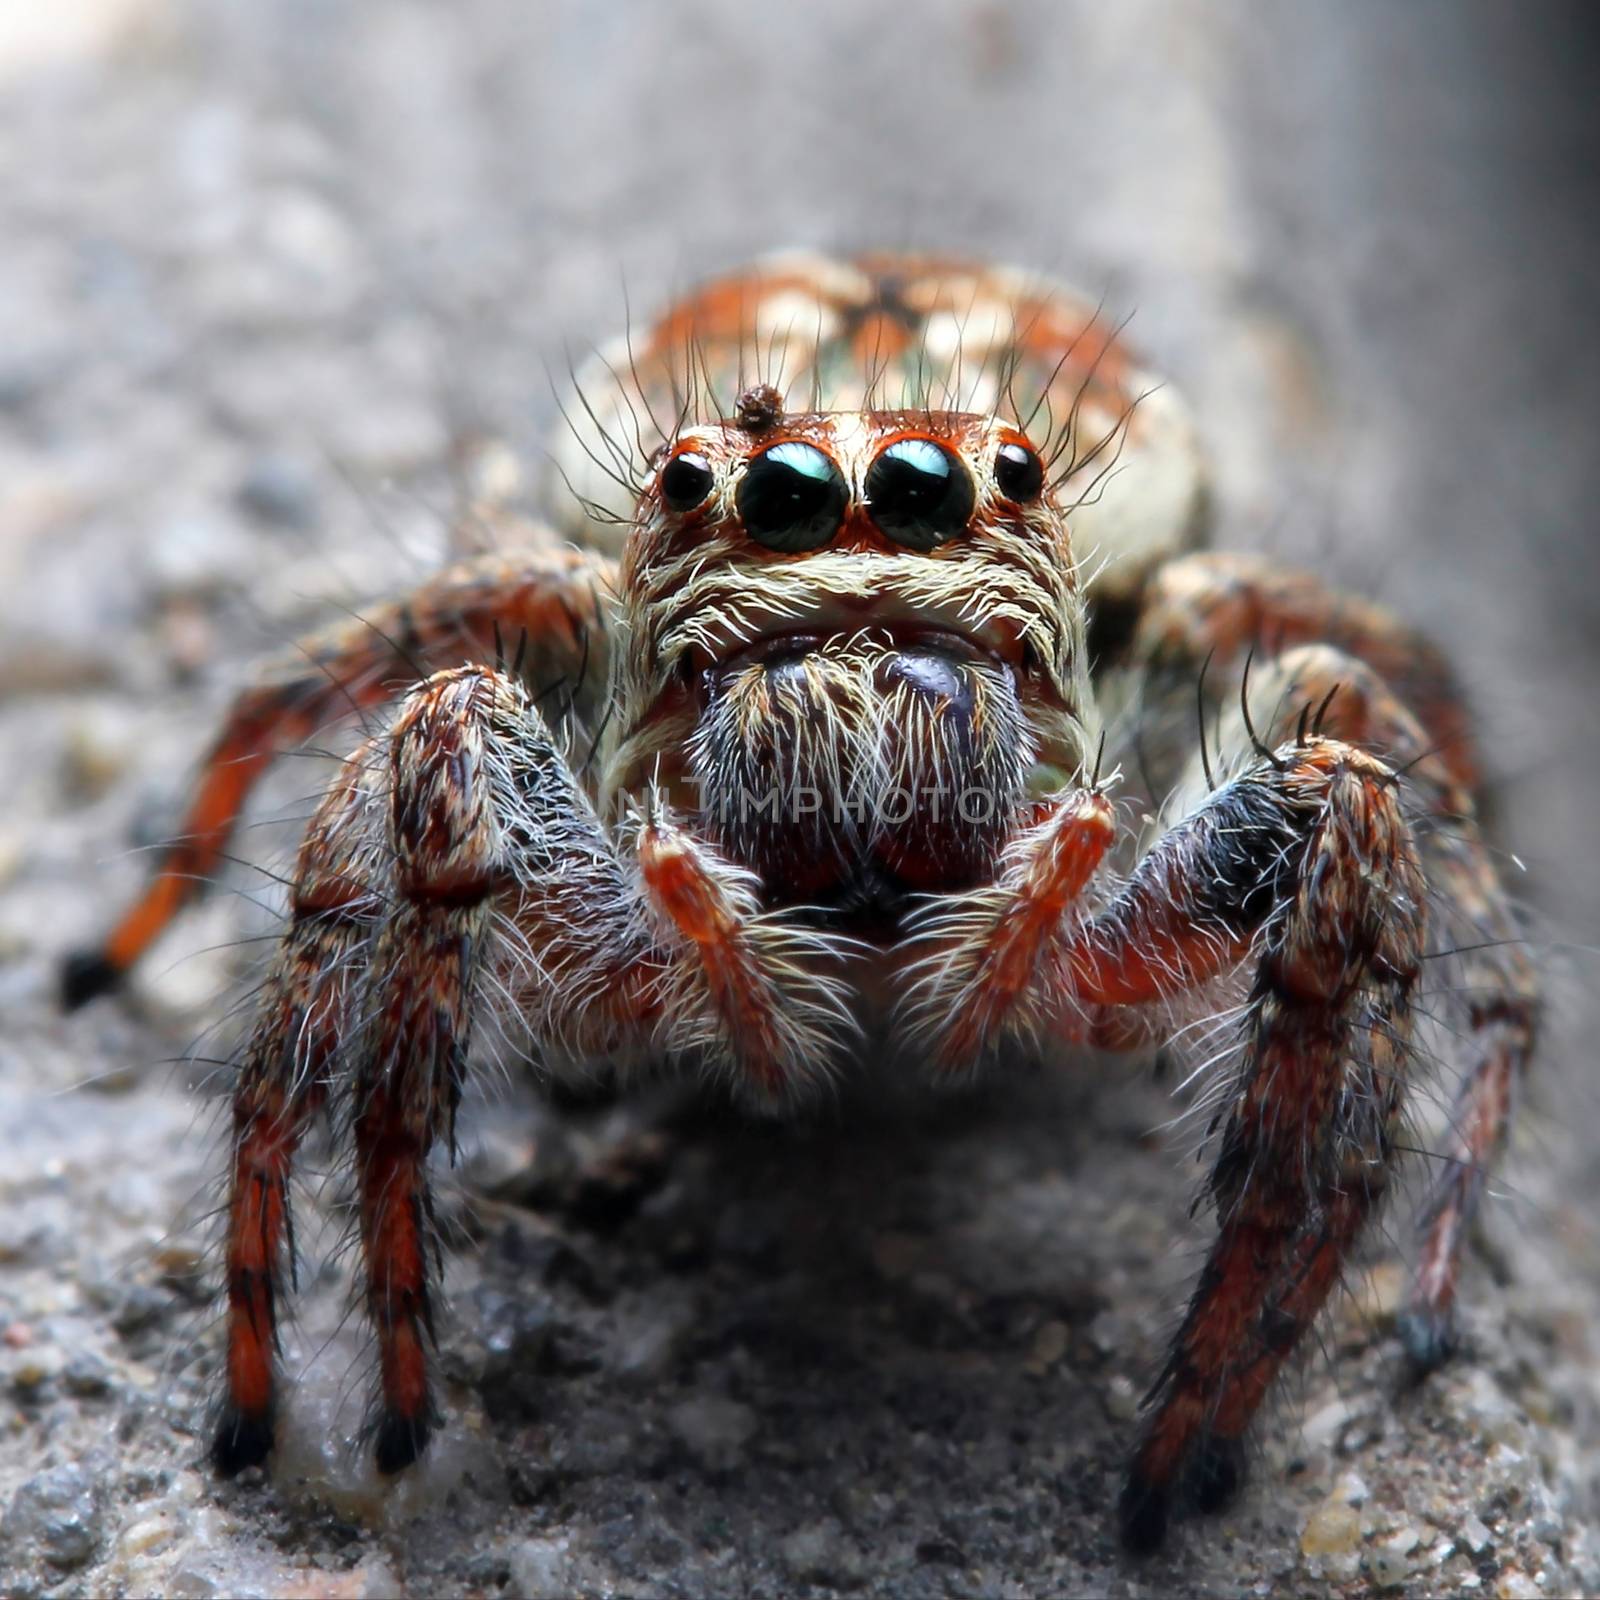 Closeup of a spider by leisuretime70